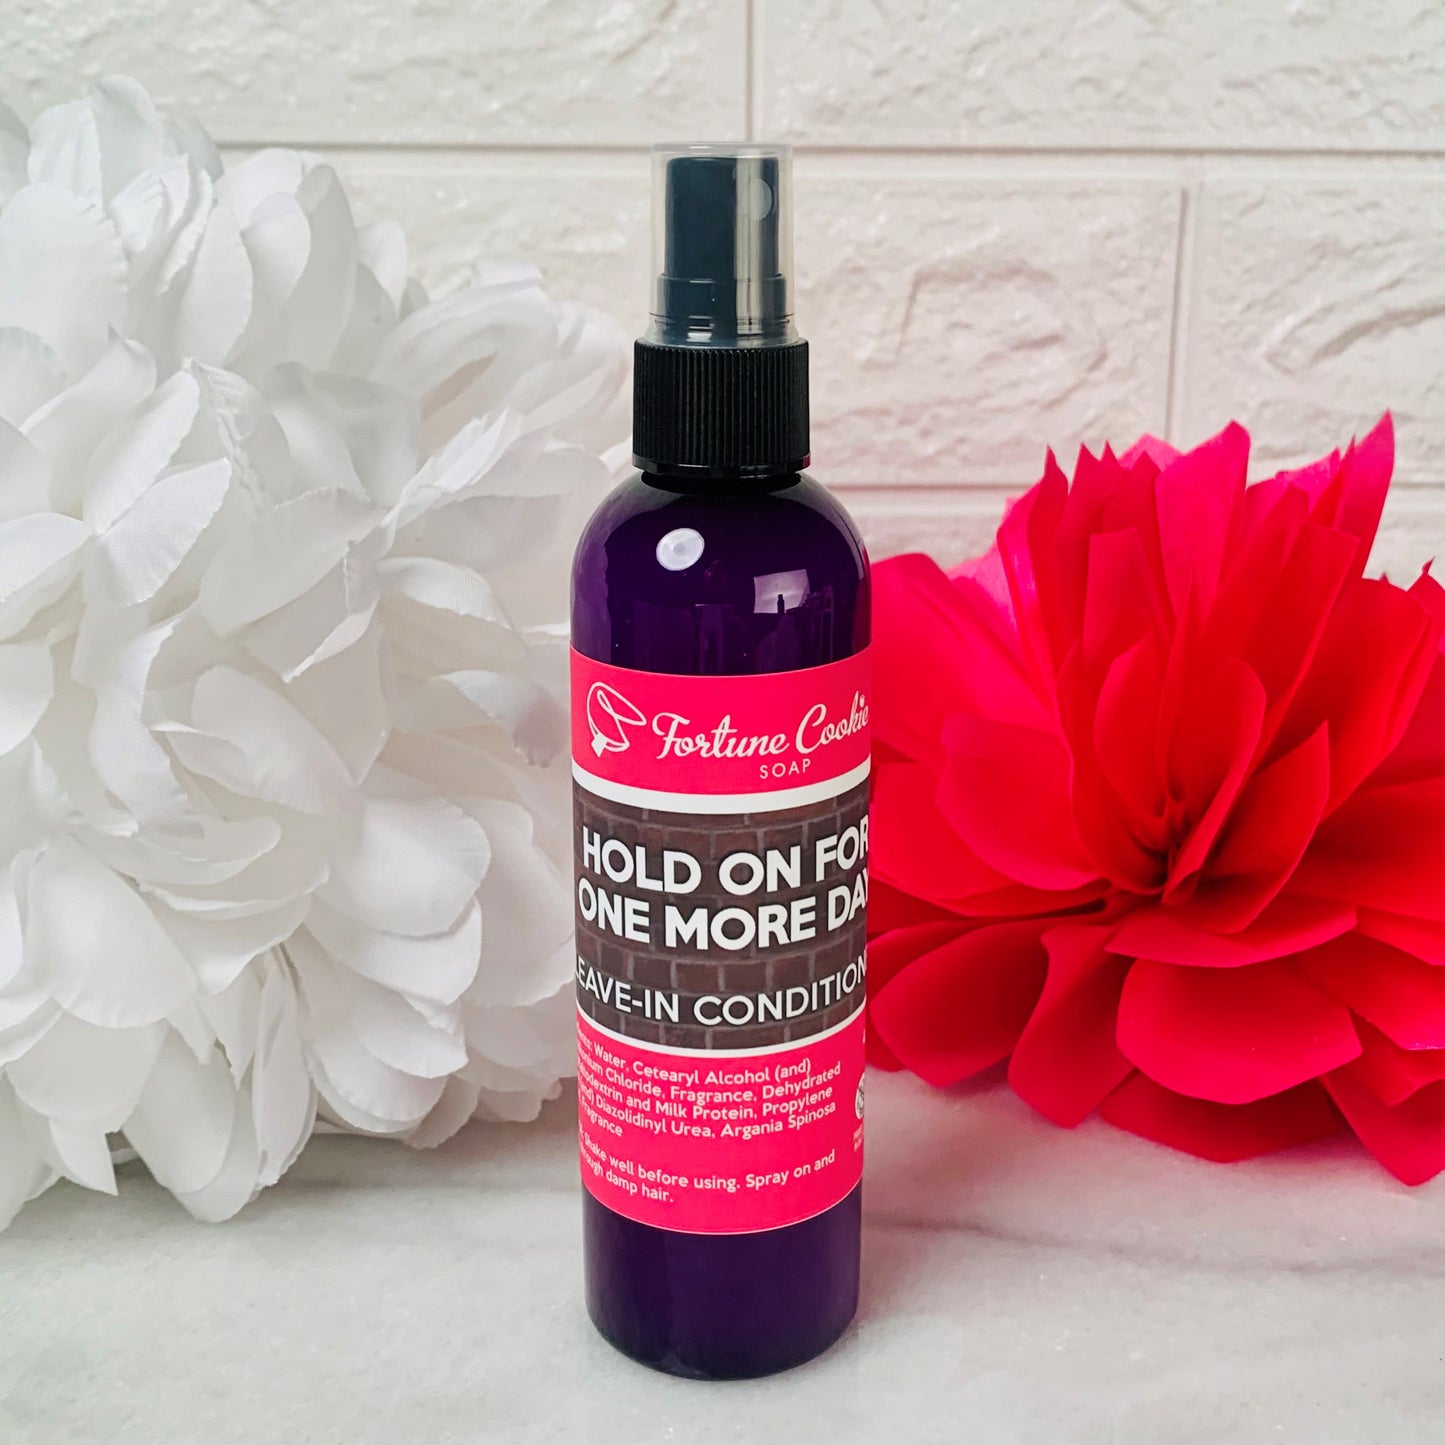 HOLD ON FOR ONE MORE DAY Leave-In Conditioner